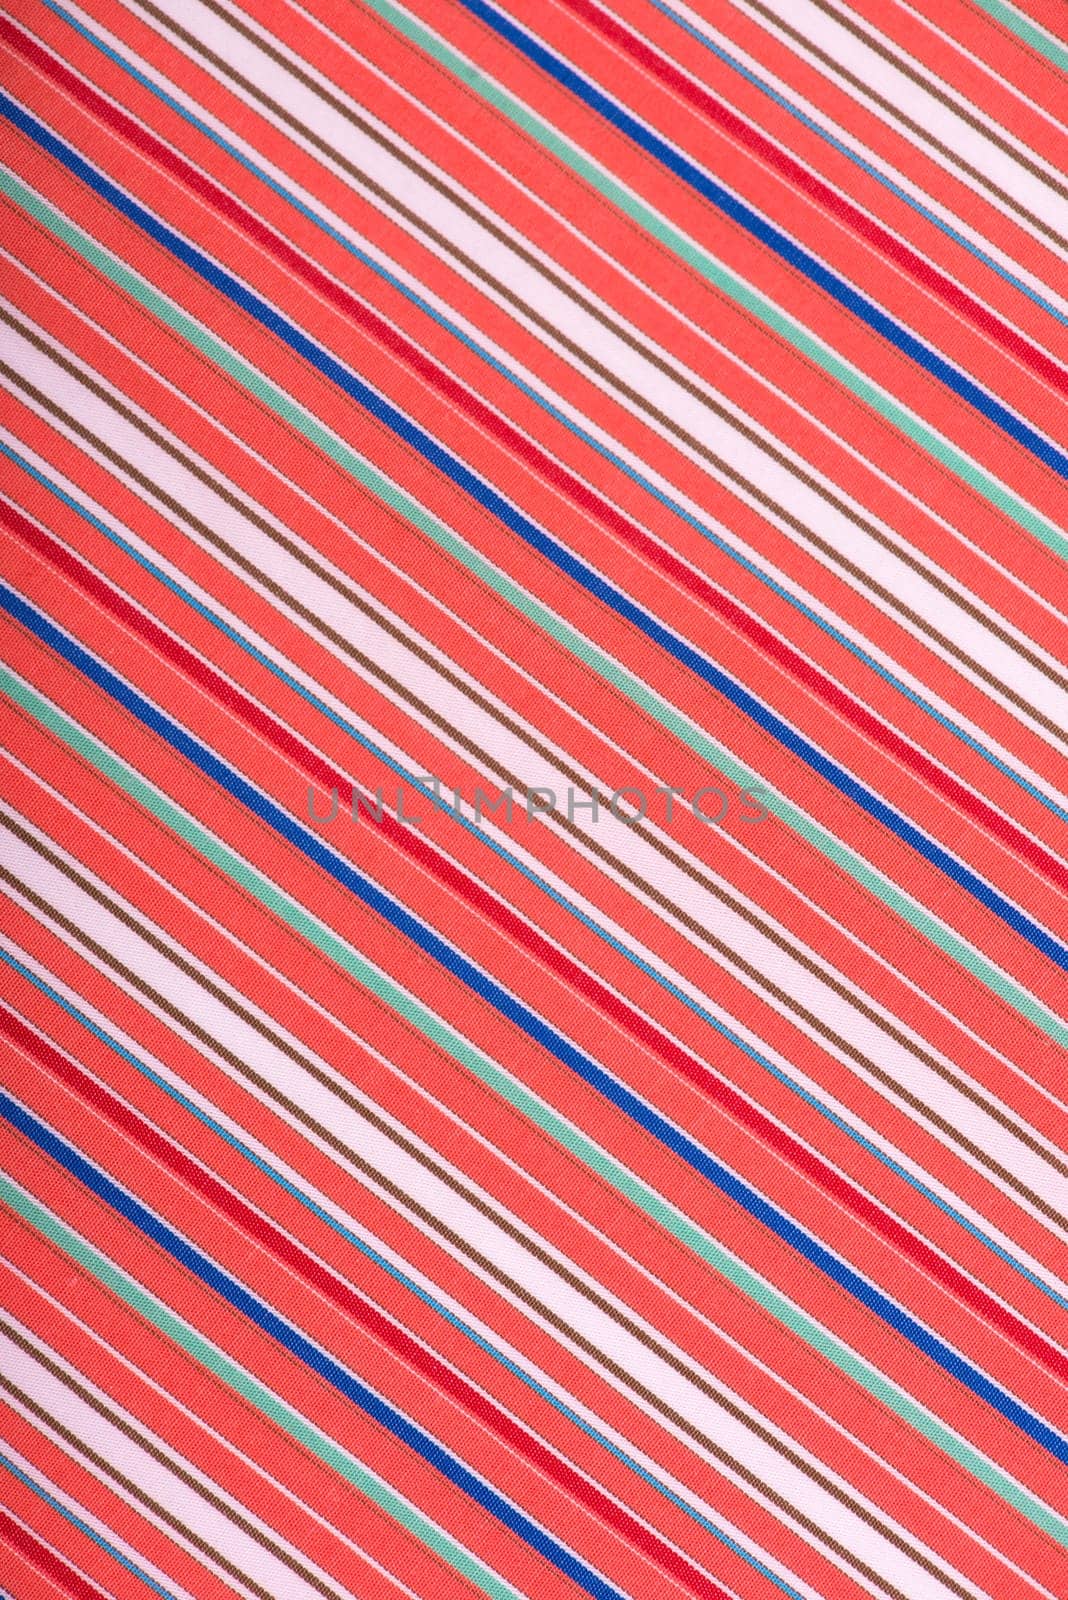 Blue, white, pink cotton shirting striped fabric. fabric texture for background, natural textile pattern. by aprilphoto